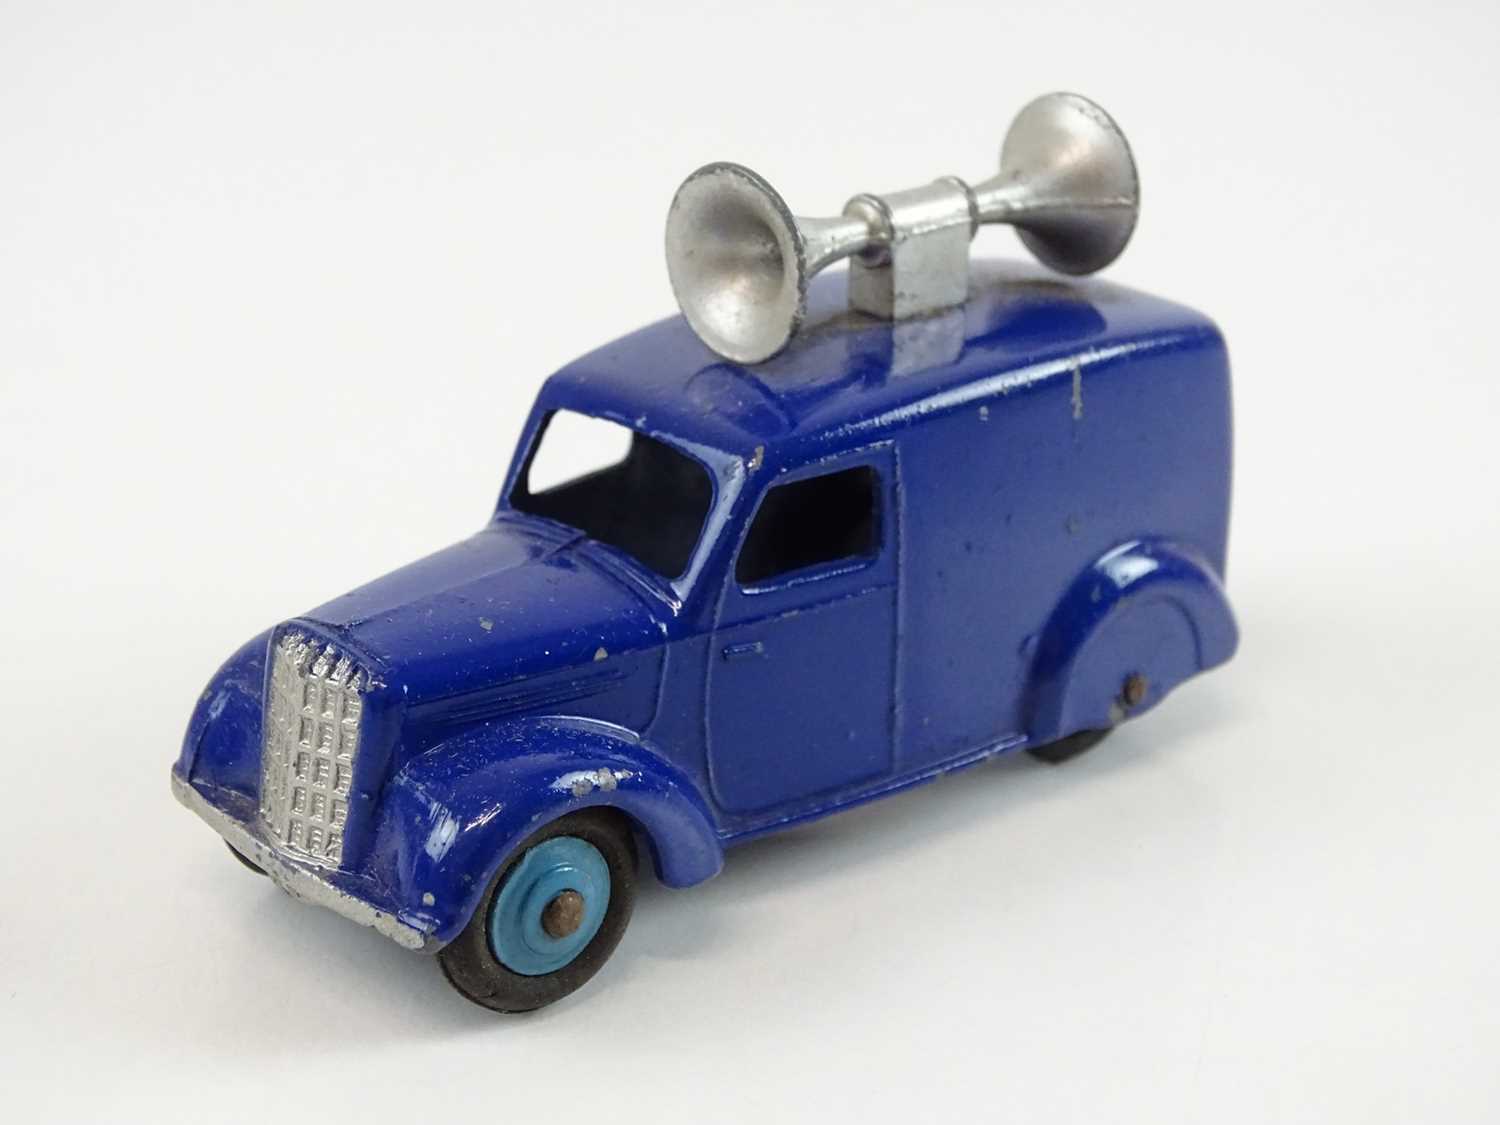 A DINKY 34C Loud Speaker Van trade box complete with 6 examples of the model, 2 in grey and 4 in - Image 8 of 13